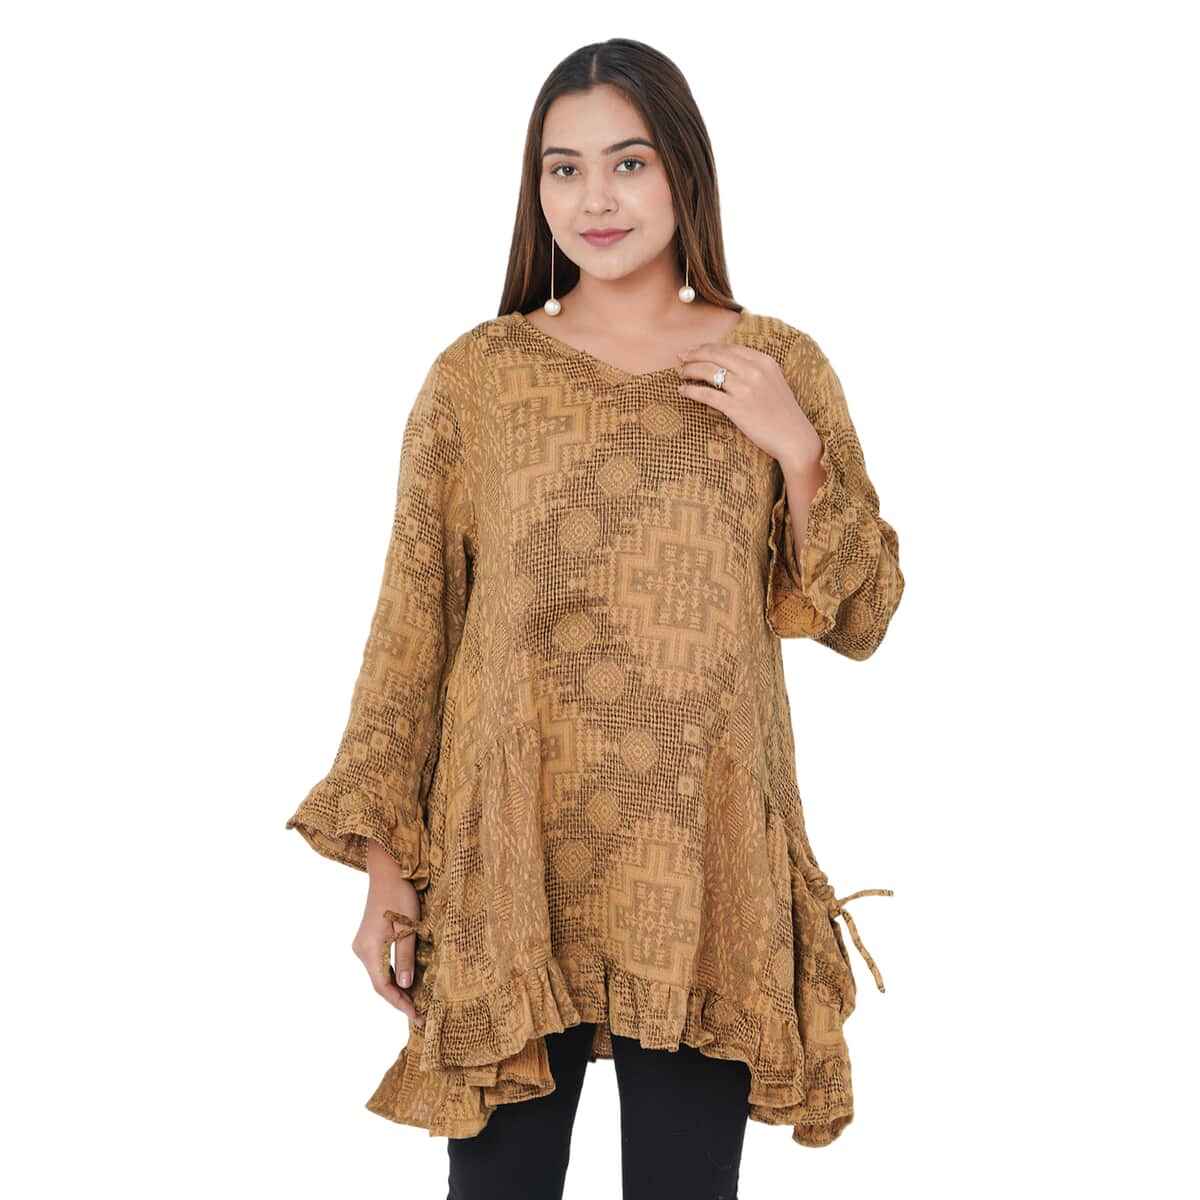 TAMSY Gold 100% Cotton Double Layer Jacquard Ruffle Hem Top - S/M (33"x24") image number 2